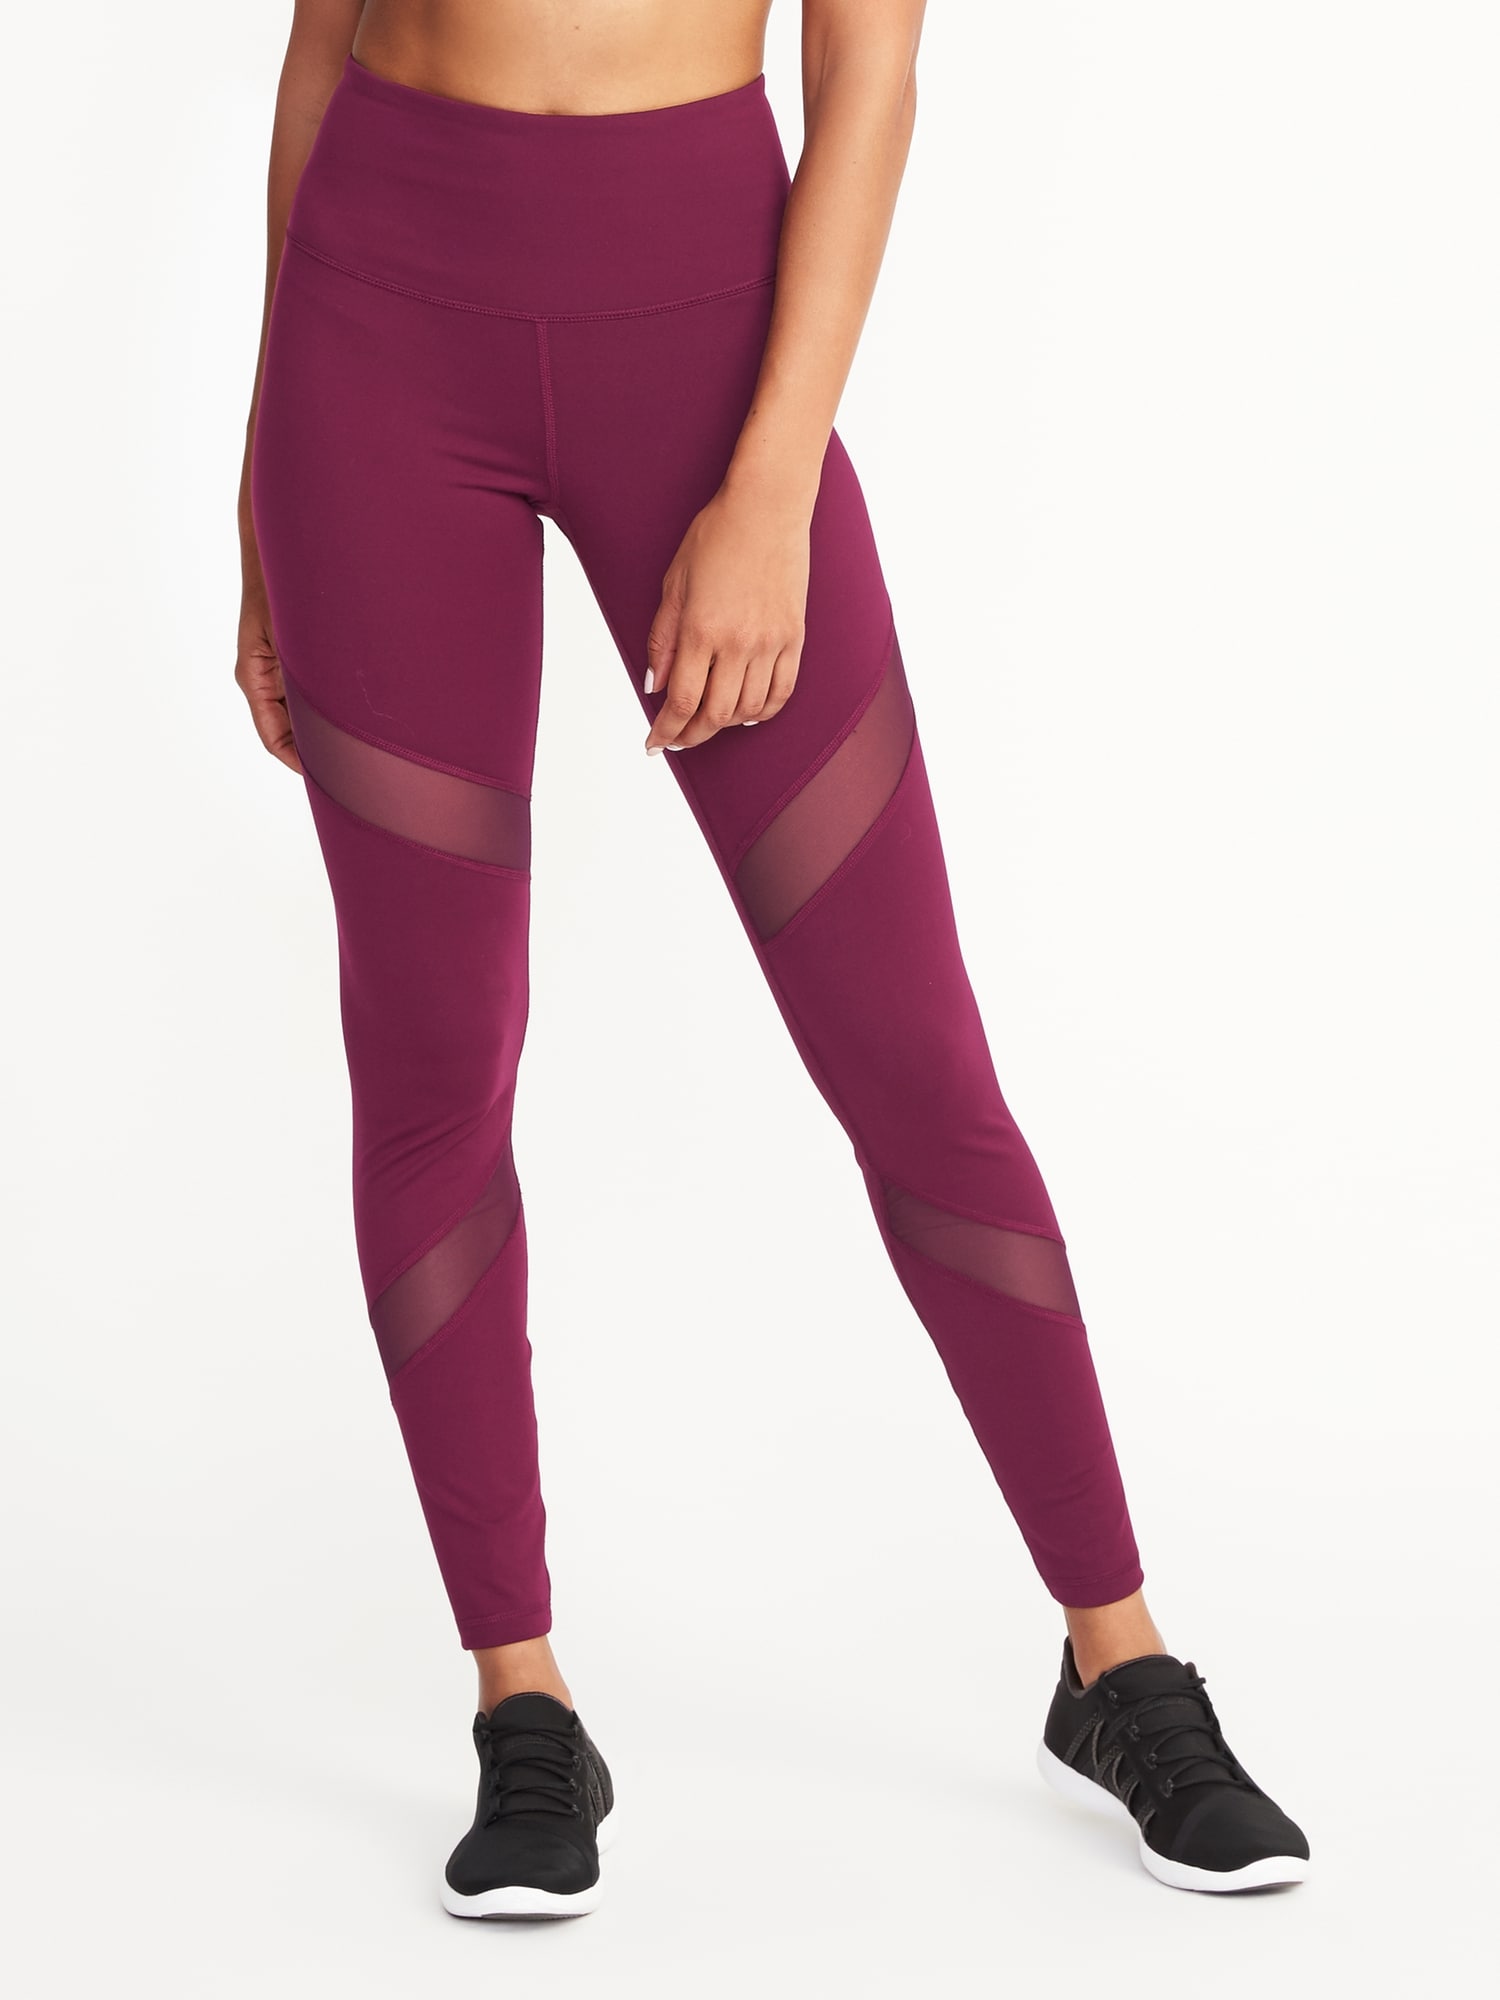 Stay Comfortable and Stylish with Old Navy High Compression Yoga Pants